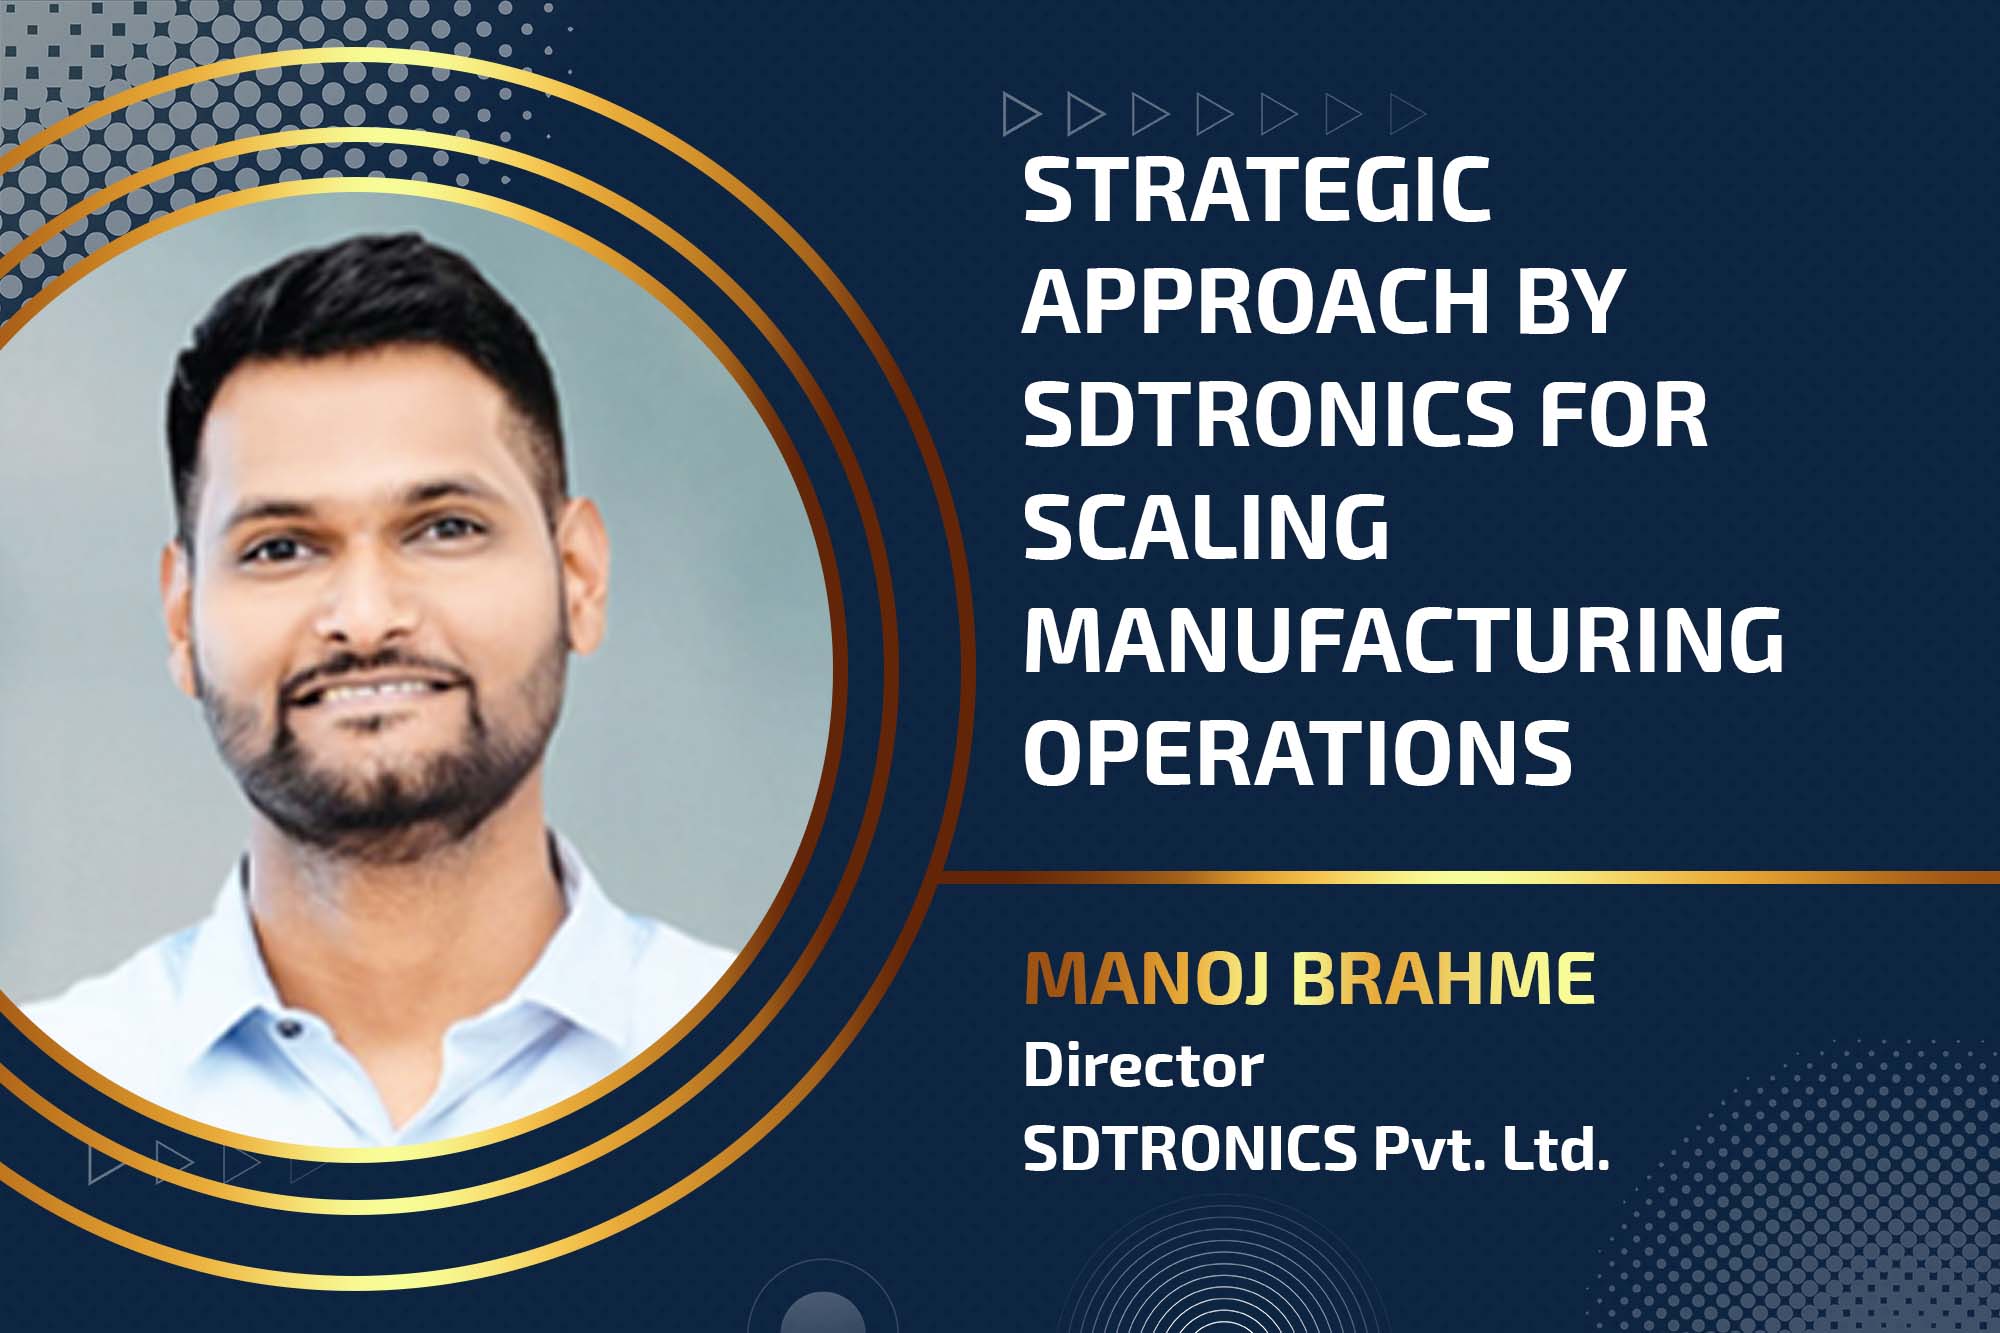 Strategic approach by SDTronics for scaling manufacturing operations 